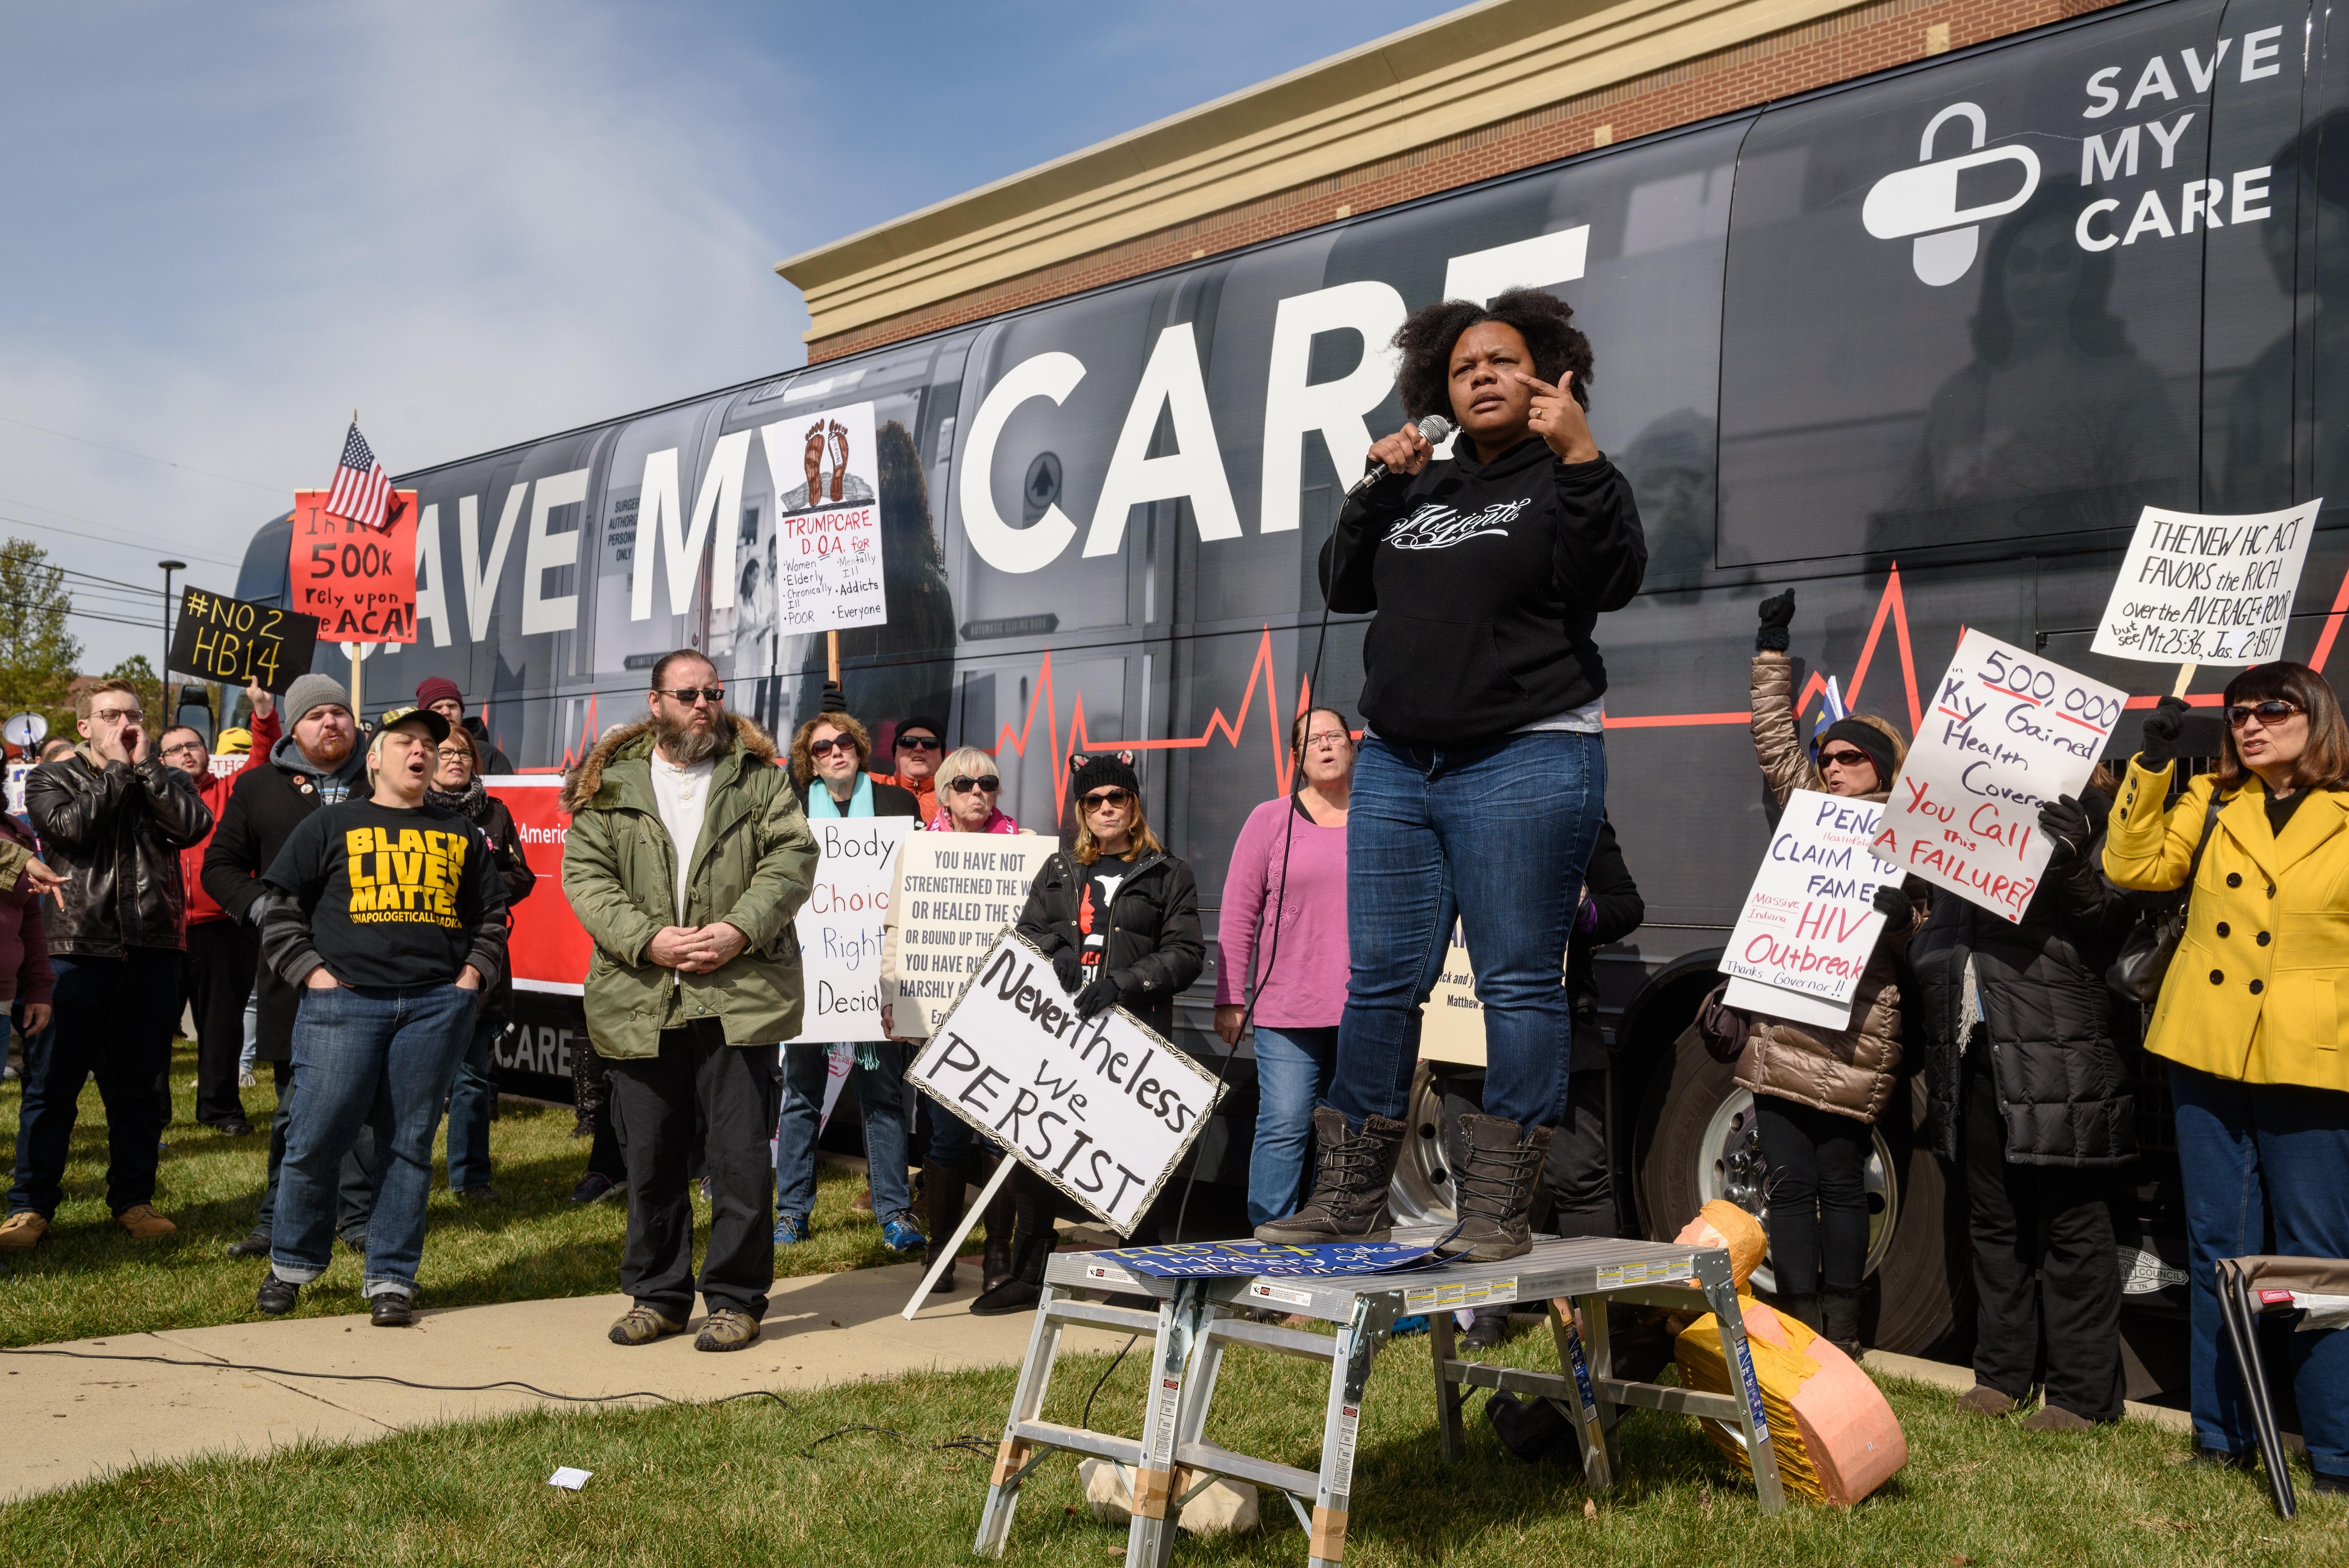 Chanelle Helm, a Black Lives Matter of Louisville organizer, delivers her message to protesters gathered in front of Indivisible Kentucky's Save My Care Bus. - BRIAN BOHANNON